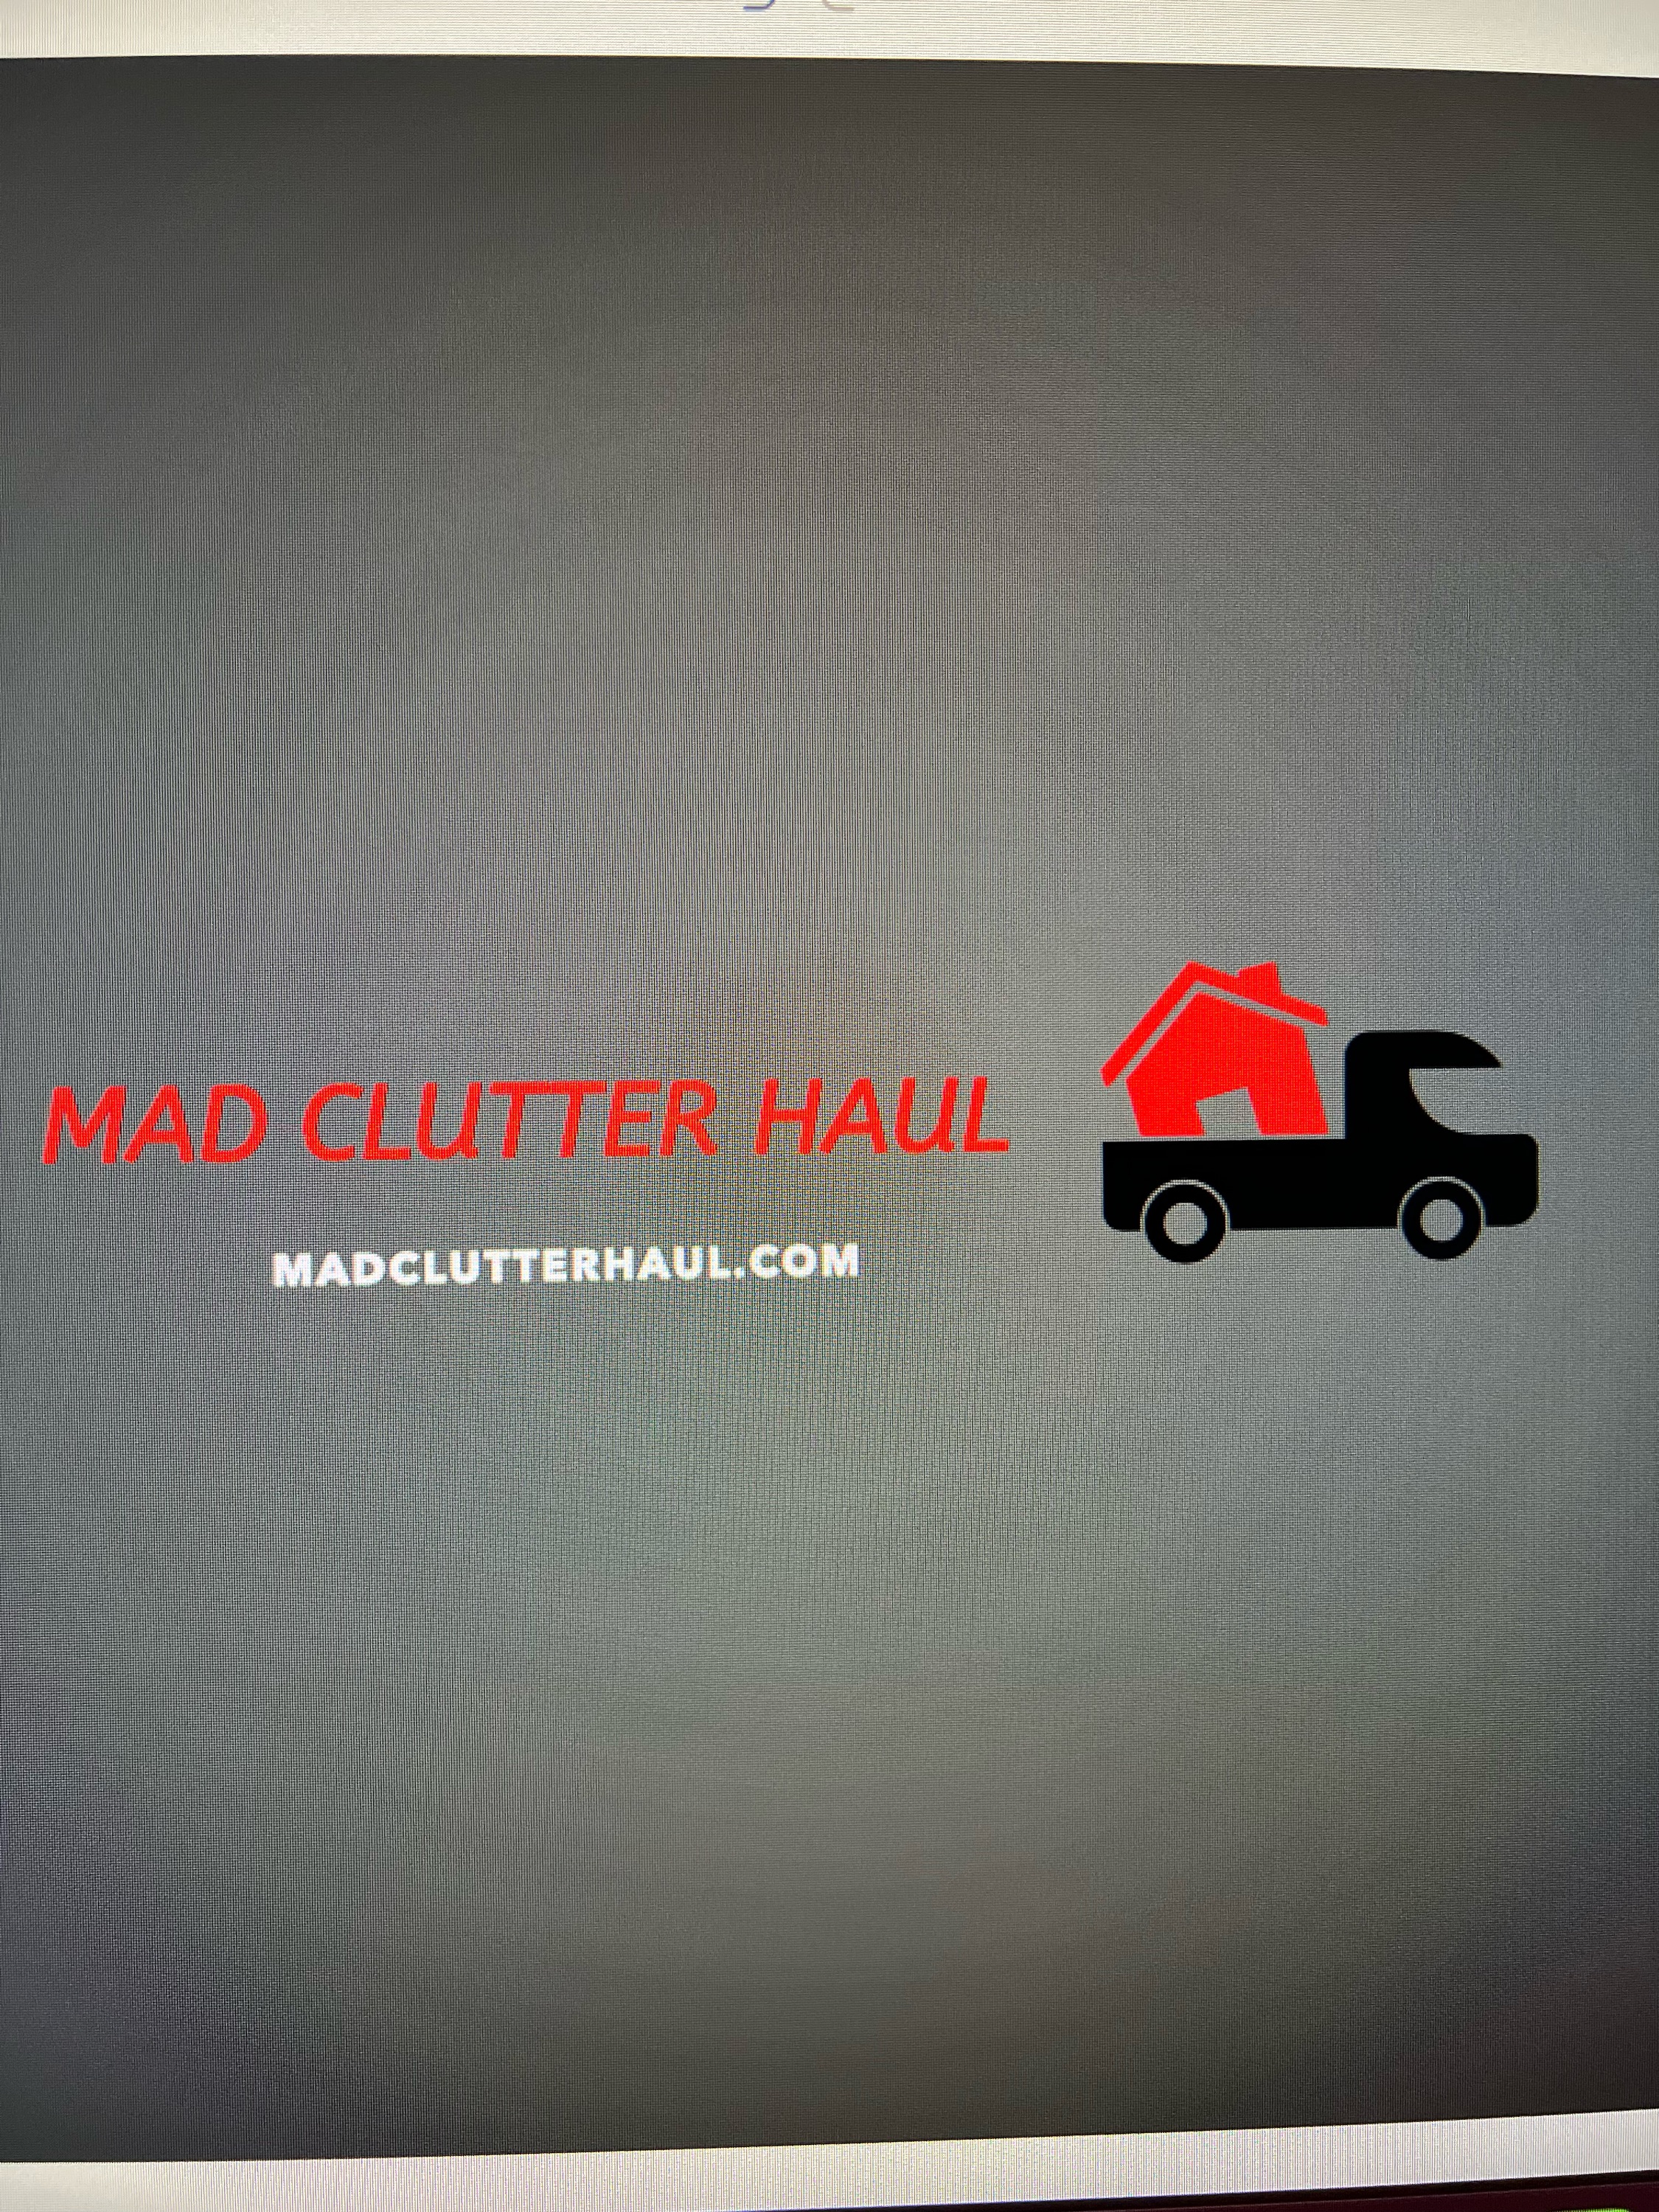 Mad Clutter Haul Logo